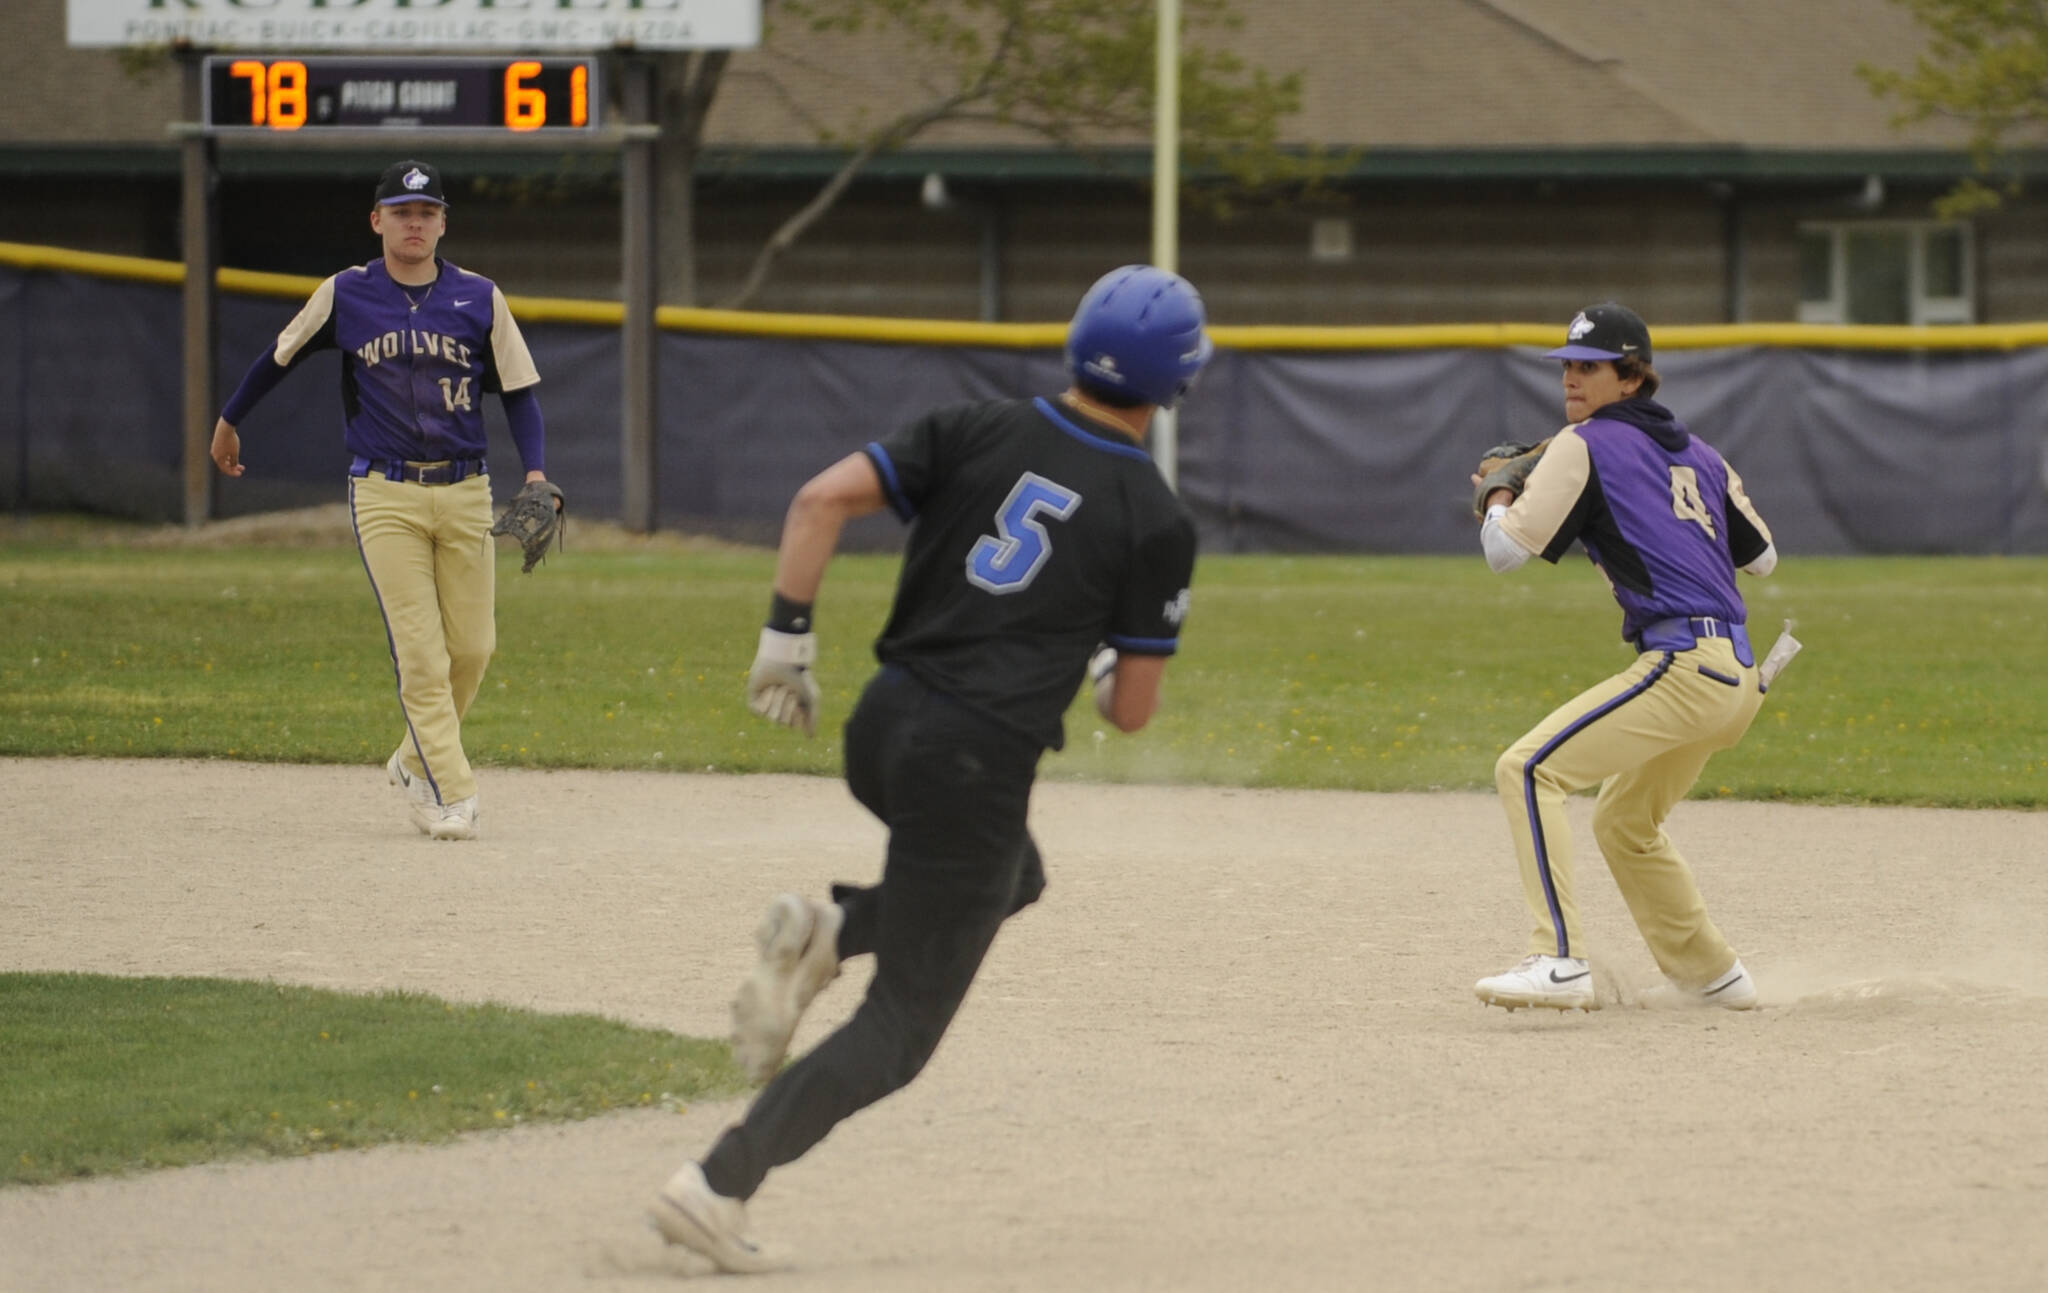 Michael Dashiell/Olympic Peninsula News Group (2)
With shortstop Devyn Dearinger (left) looking on, Sequim second baseman Bryan Laboy turns a double play in the top of the fifth inning as the Wolves beat North Mason 4-3 on Wednesday.